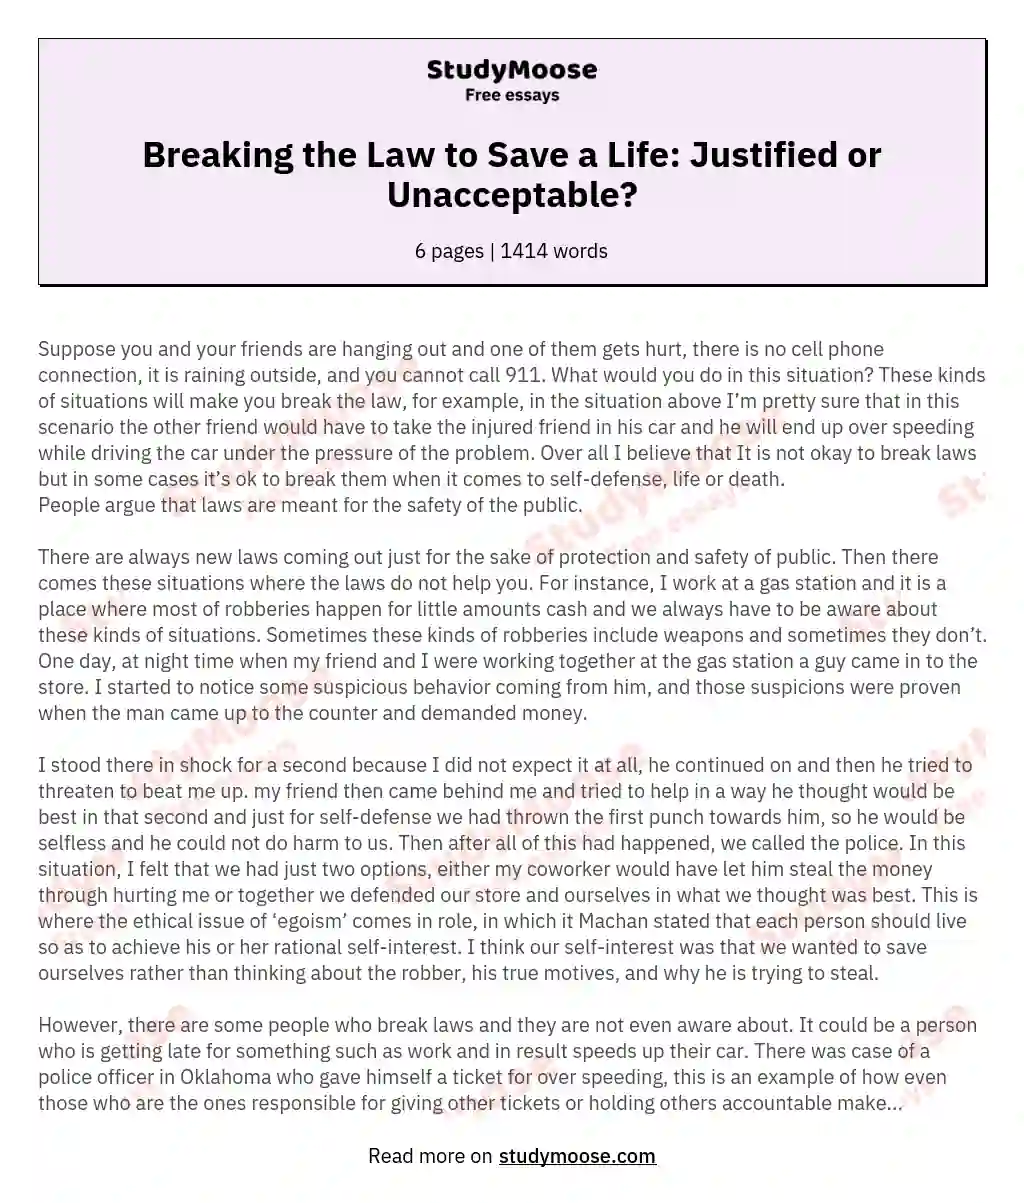 Breaking the Law to Save a Life: Justified or Unacceptable? essay